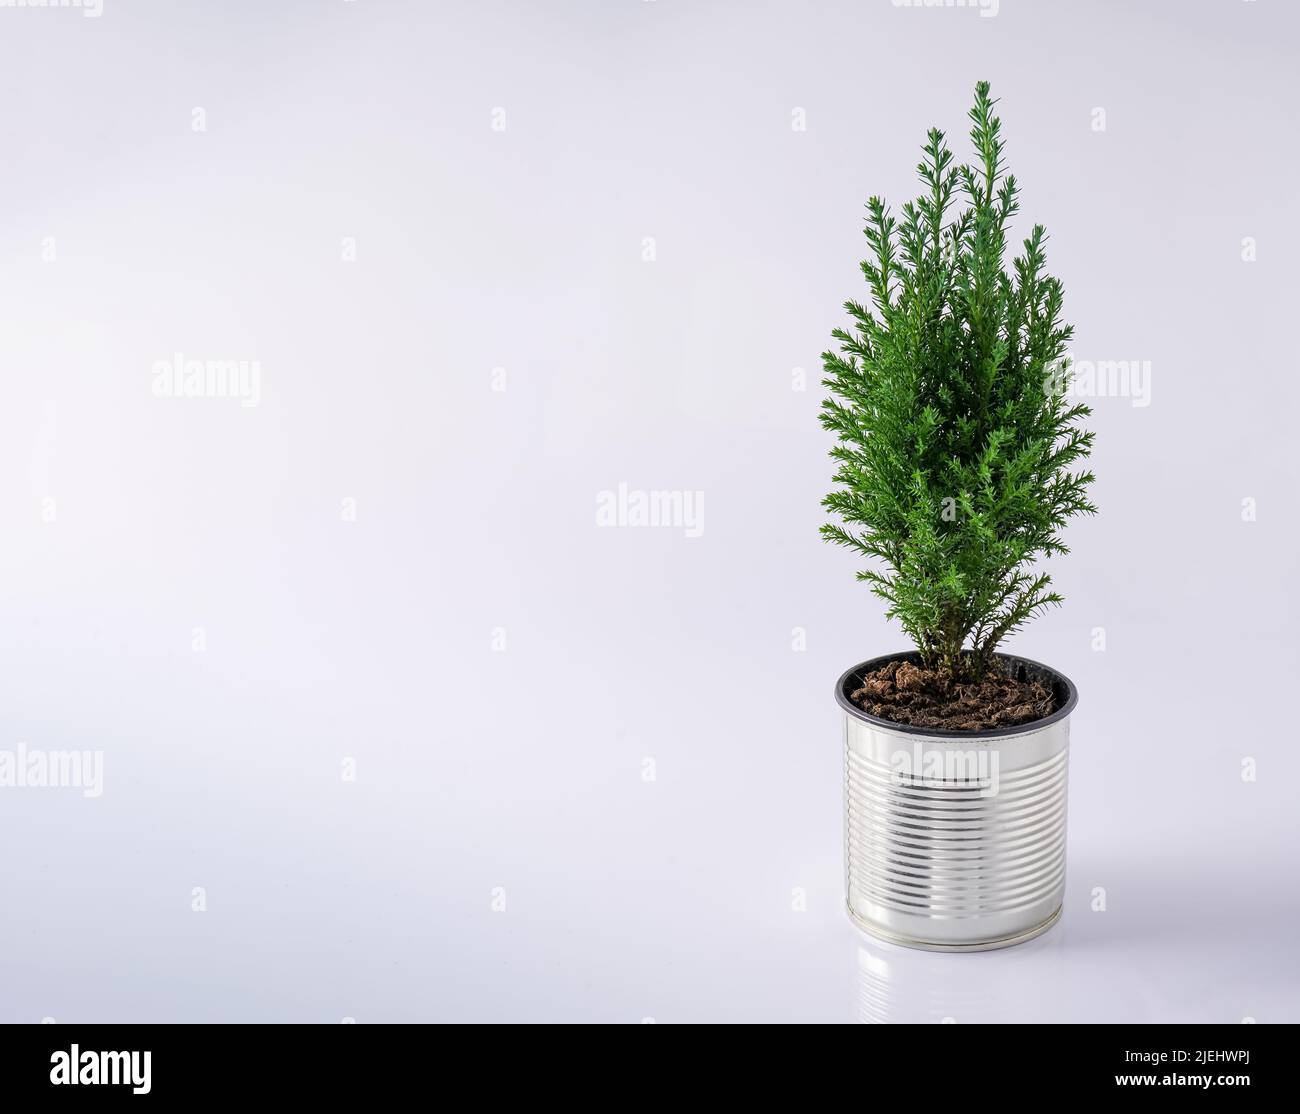 The cypress is green. Coniferous house plant. Christmas tree in a pot. Copy space. Tin can like a flowerpot. Use of recyclable materials. White background with place for text. Stock Photo